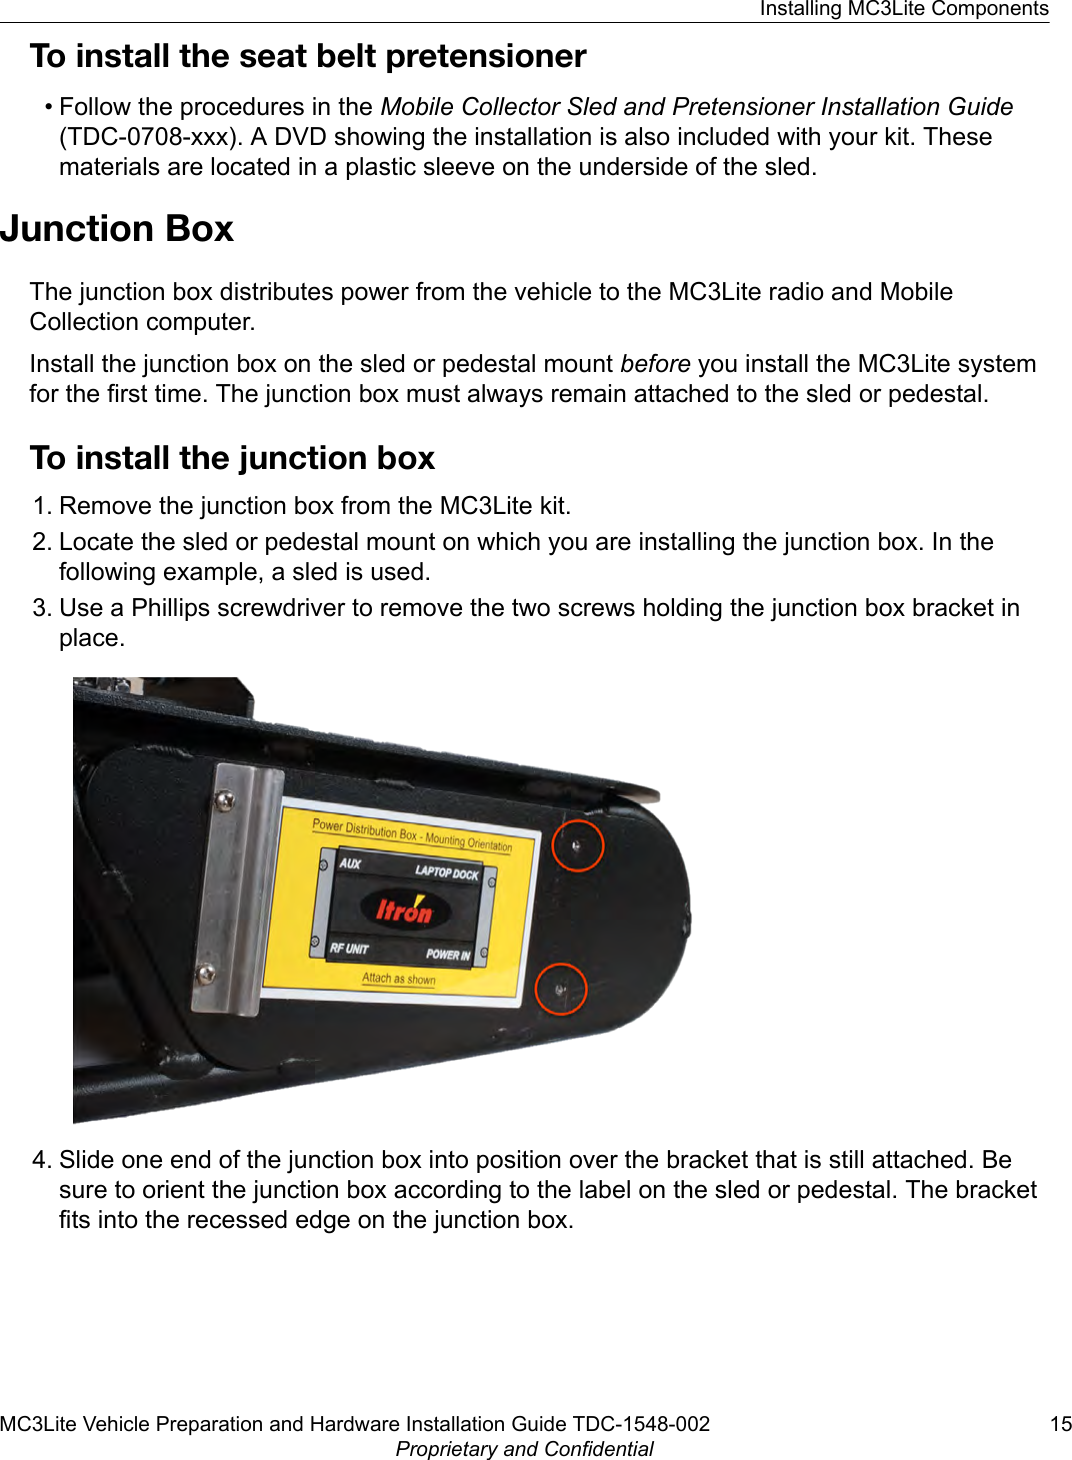 To install the seat belt pretensioner• Follow the procedures in the Mobile Collector Sled and Pretensioner Installation Guide(TDC-0708-xxx). A DVD showing the installation is also included with your kit. Thesematerials are located in a plastic sleeve on the underside of the sled.Junction BoxThe junction box distributes power from the vehicle to the MC3Lite radio and MobileCollection computer.Install the junction box on the sled or pedestal mount before you install the MC3Lite systemfor the first time. The junction box must always remain attached to the sled or pedestal.To install the junction box1. Remove the junction box from the MC3Lite kit.2. Locate the sled or pedestal mount on which you are installing the junction box. In thefollowing example, a sled is used.3. Use a Phillips screwdriver to remove the two screws holding the junction box bracket inplace.4. Slide one end of the junction box into position over the bracket that is still attached. Besure to orient the junction box according to the label on the sled or pedestal. The bracketfits into the recessed edge on the junction box.Installing MC3Lite ComponentsMC3Lite Vehicle Preparation and Hardware Installation Guide TDC-1548-002 15Proprietary and Confidential